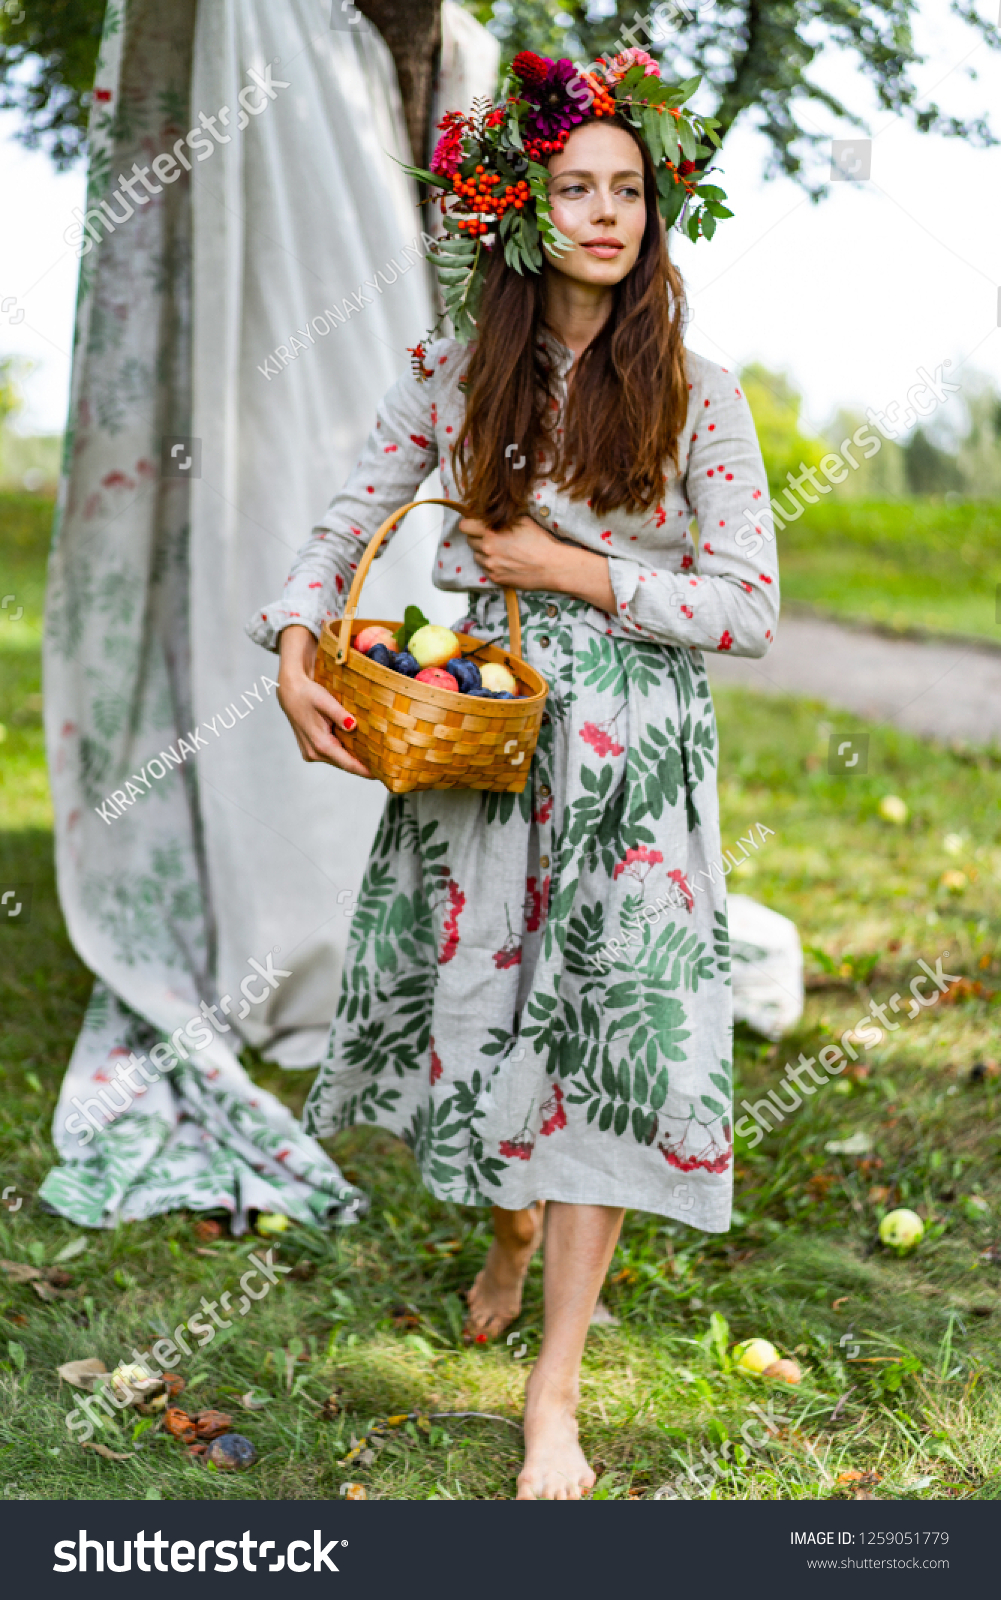 https://image.shutterstock.com/shutterstock/photos/1259051779/display_1500/stock-photo-young-woman-with-a-basket-of-fruits-plums-and-apples-1259051779.jpg